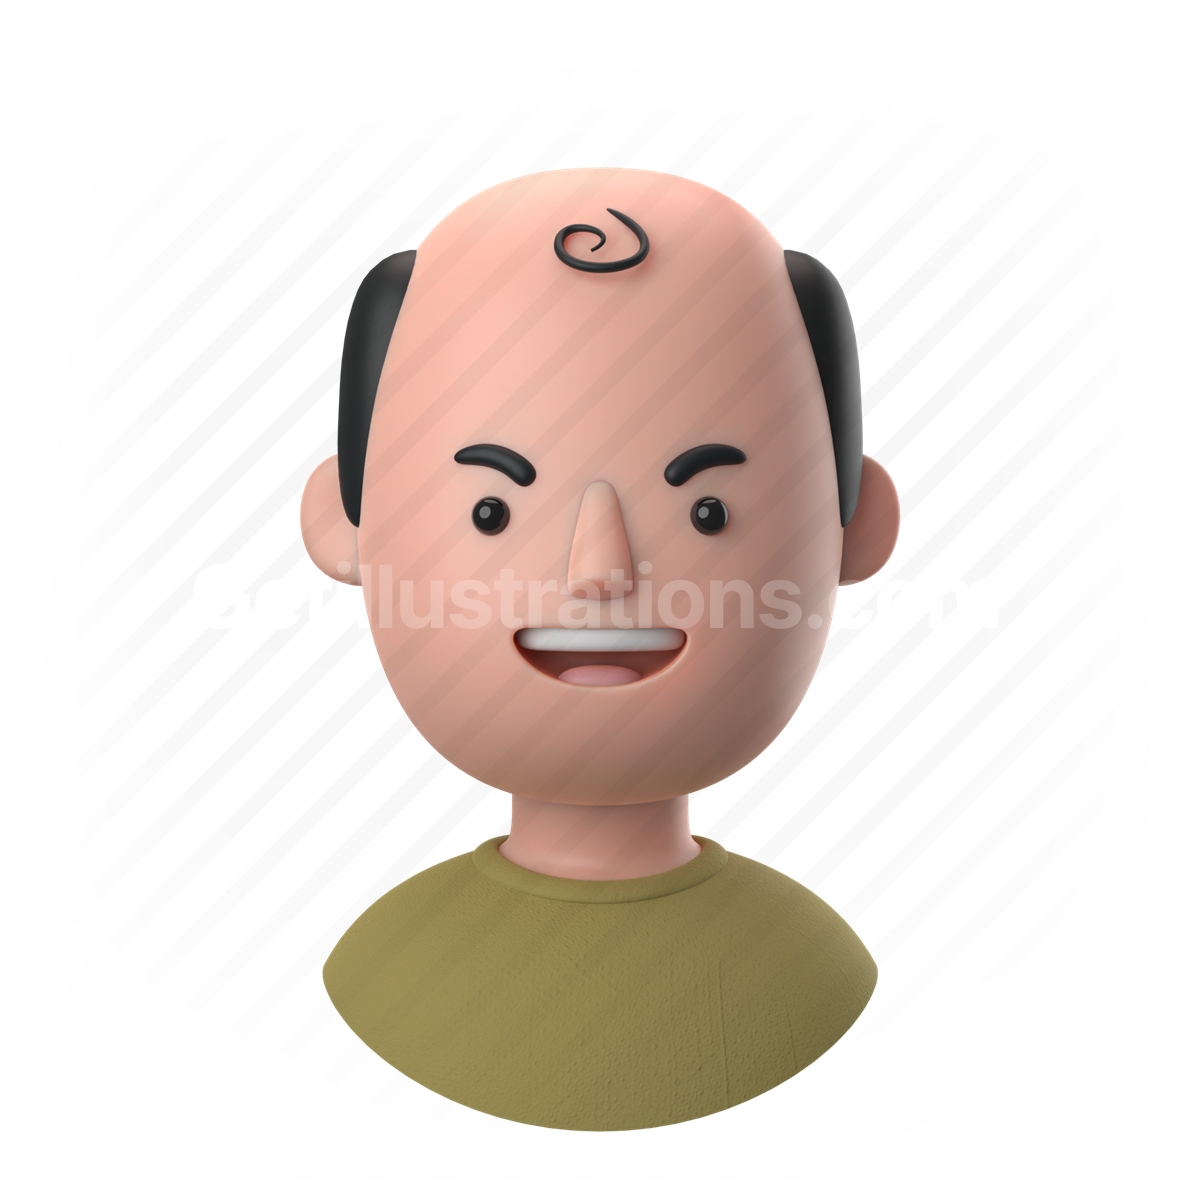 man, male, people, person, sweater, bald, balding, middle aged